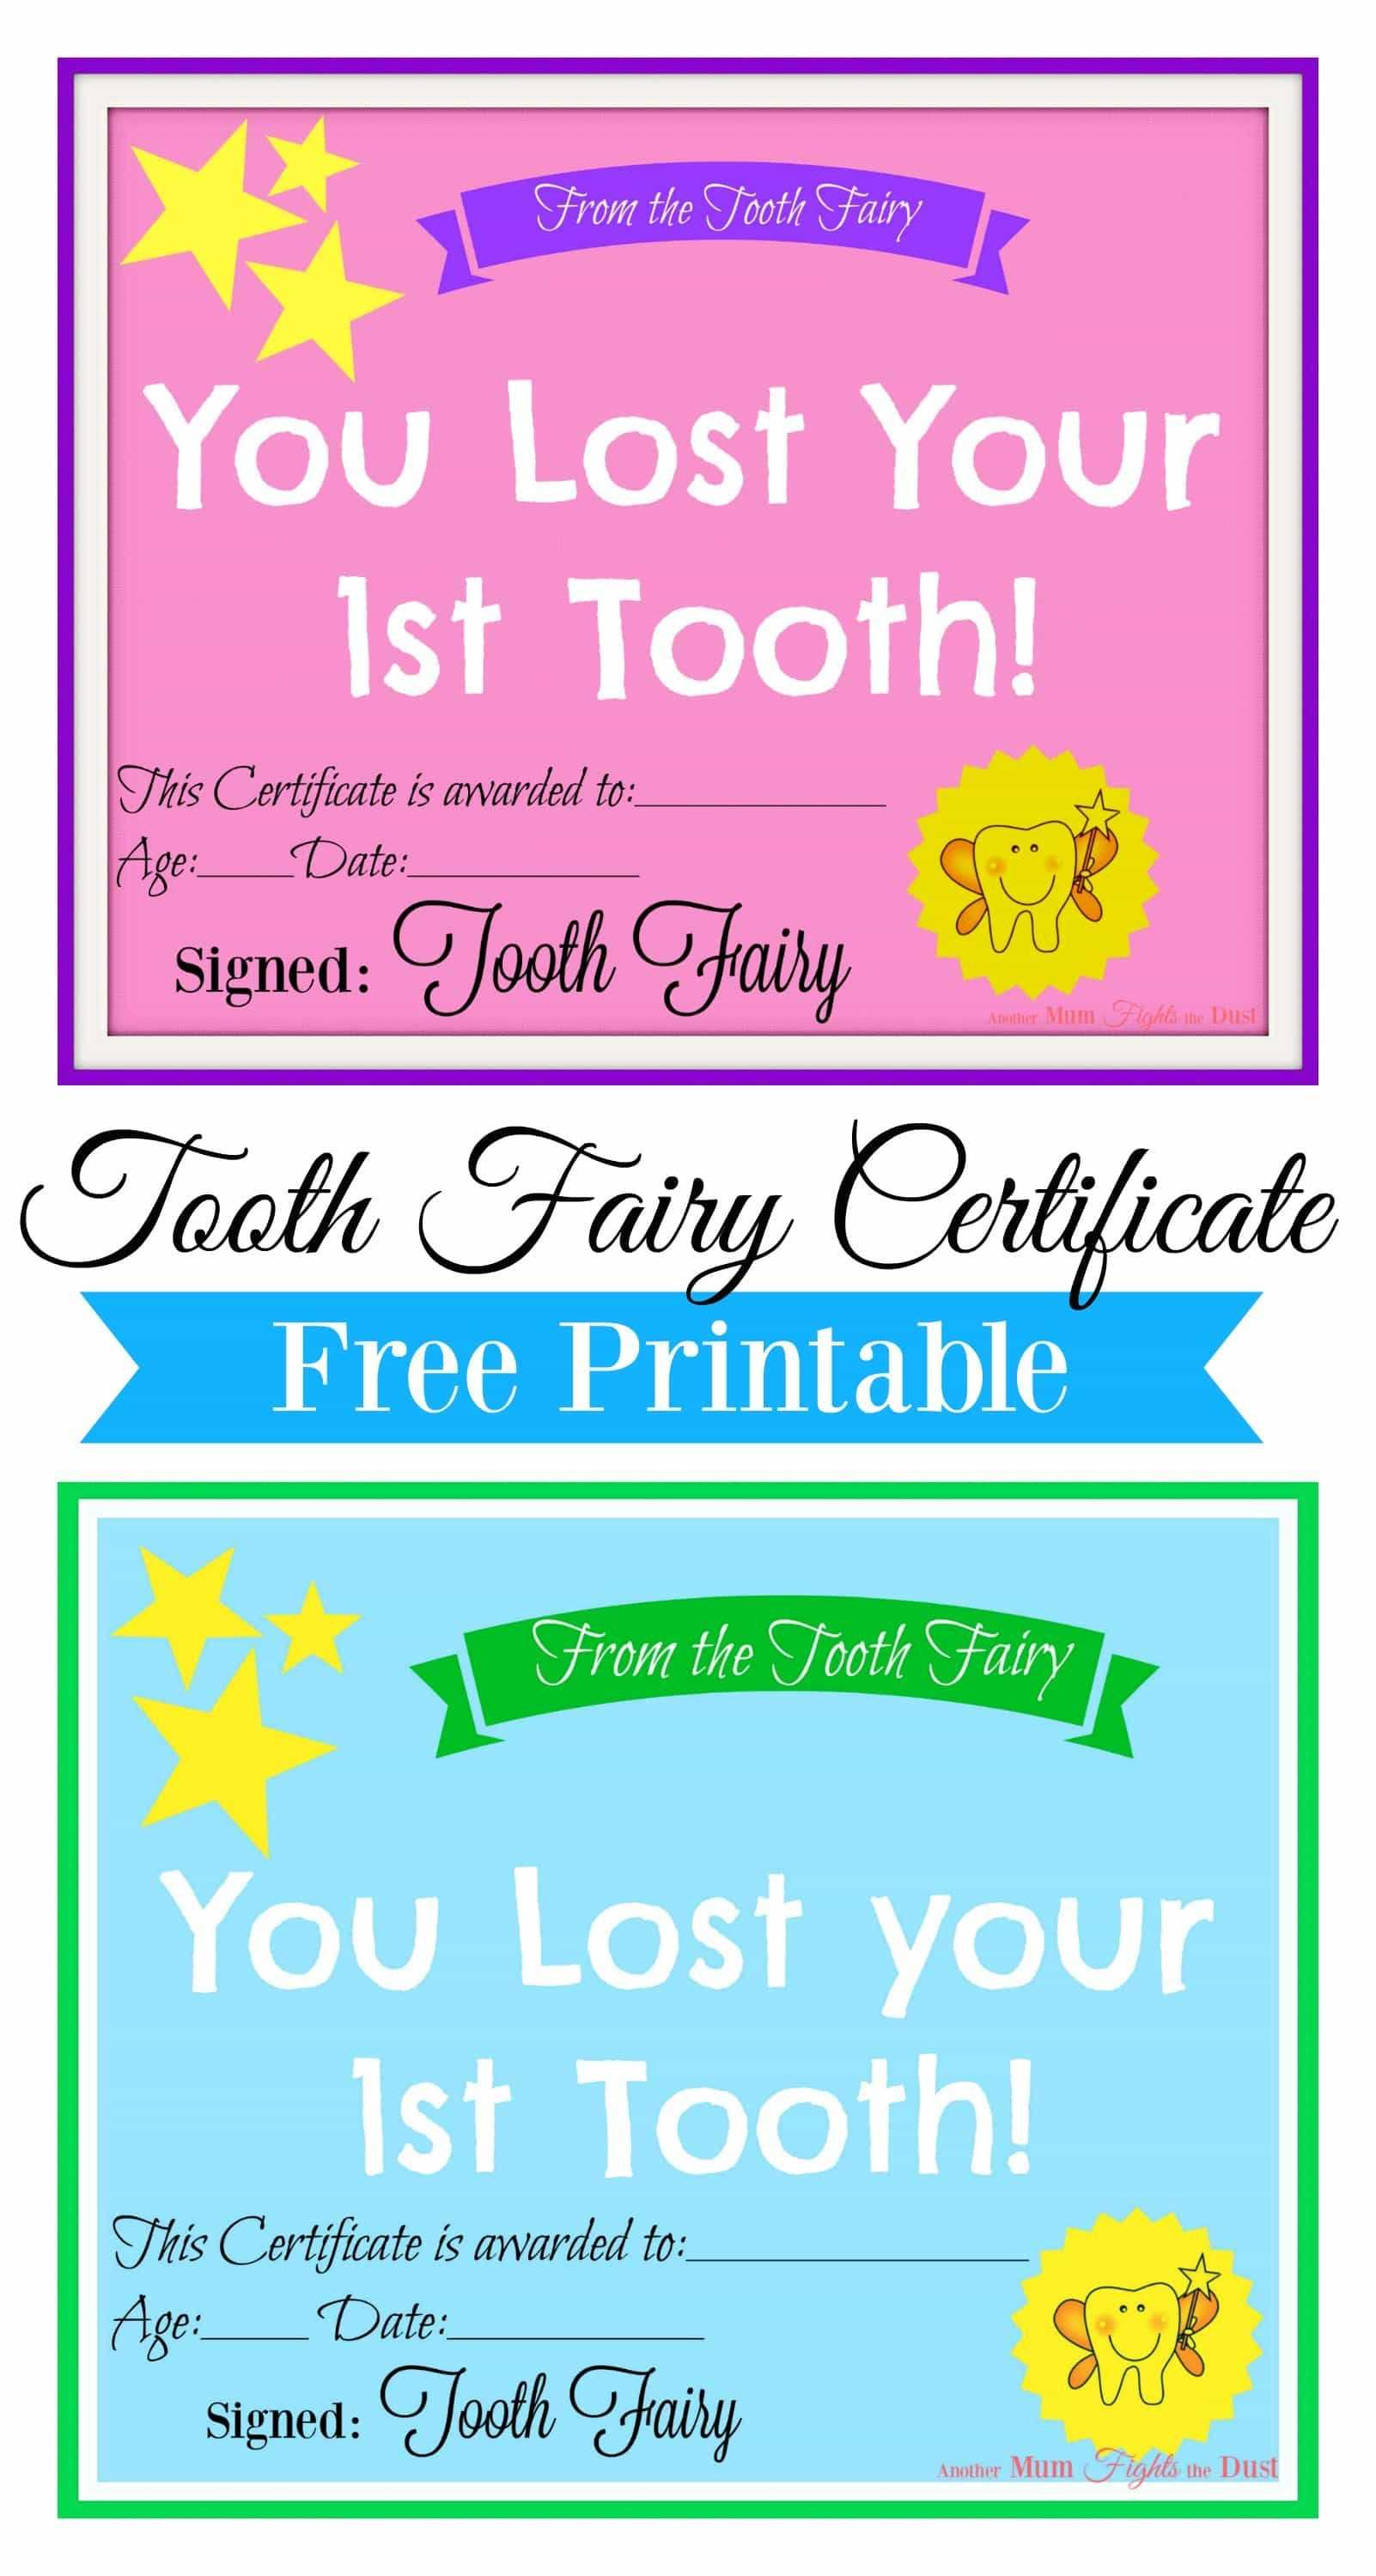 Free Printable Tooth Fairy Certificate | Tooth Fairy Ideas With Free Tooth Fairy Certificate Template